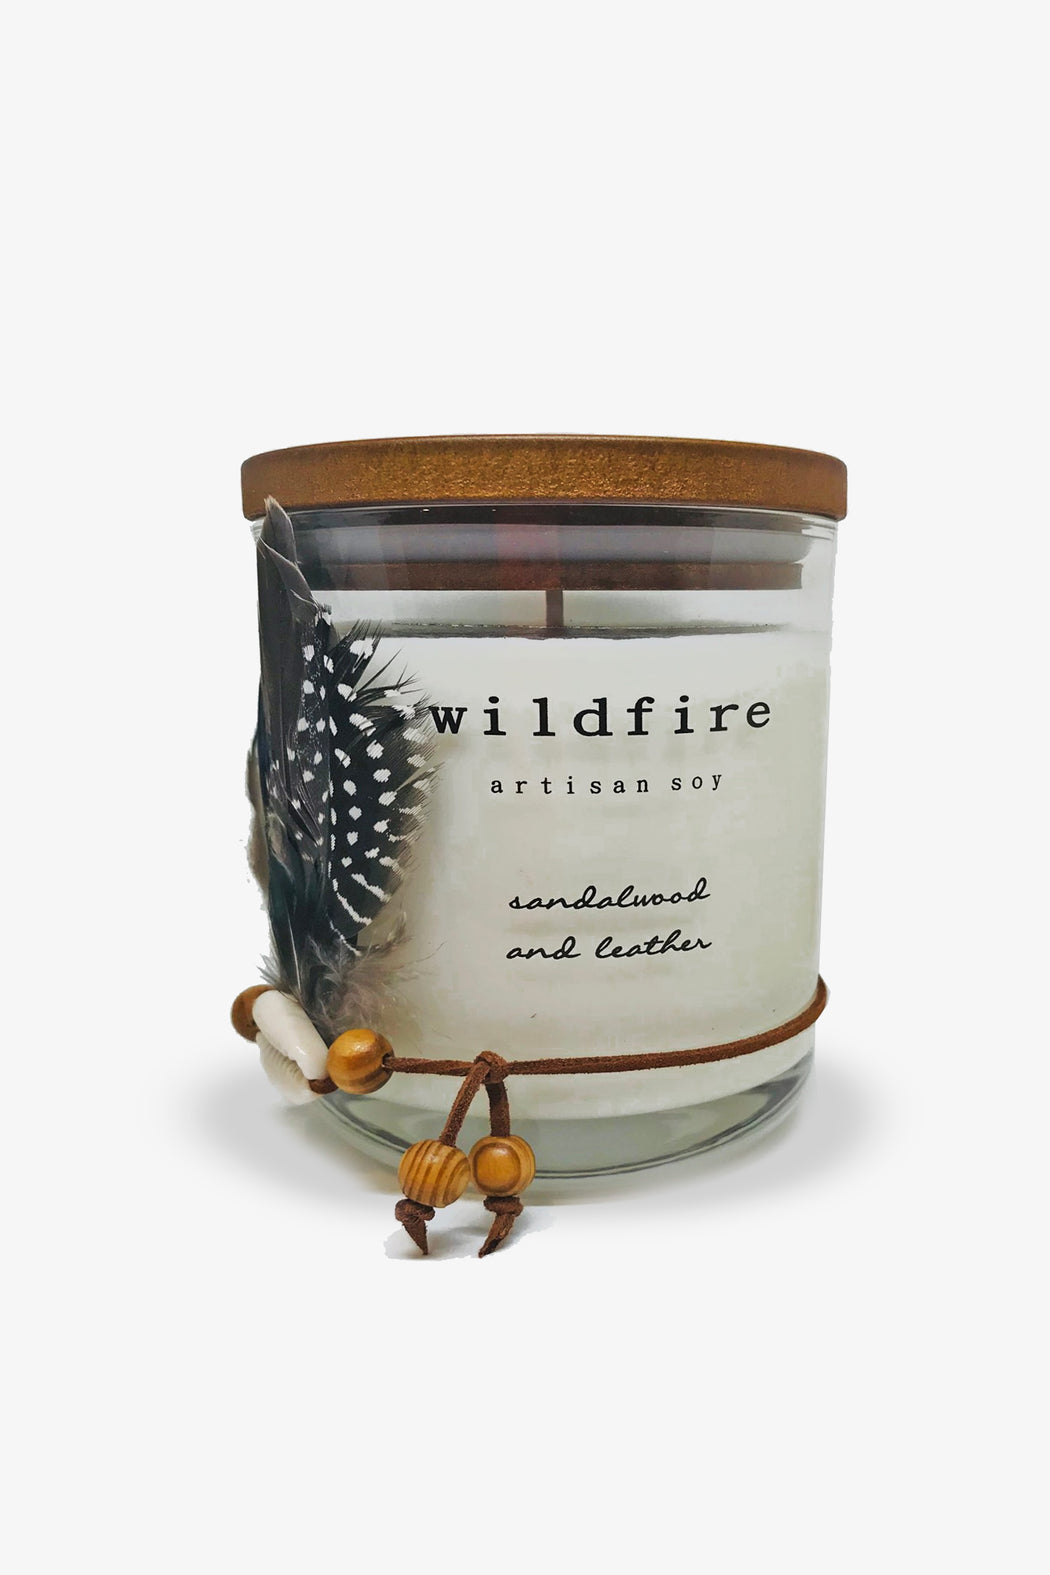 Wildfire-Sandalwood and Leather Candle-Mott and Mulberry